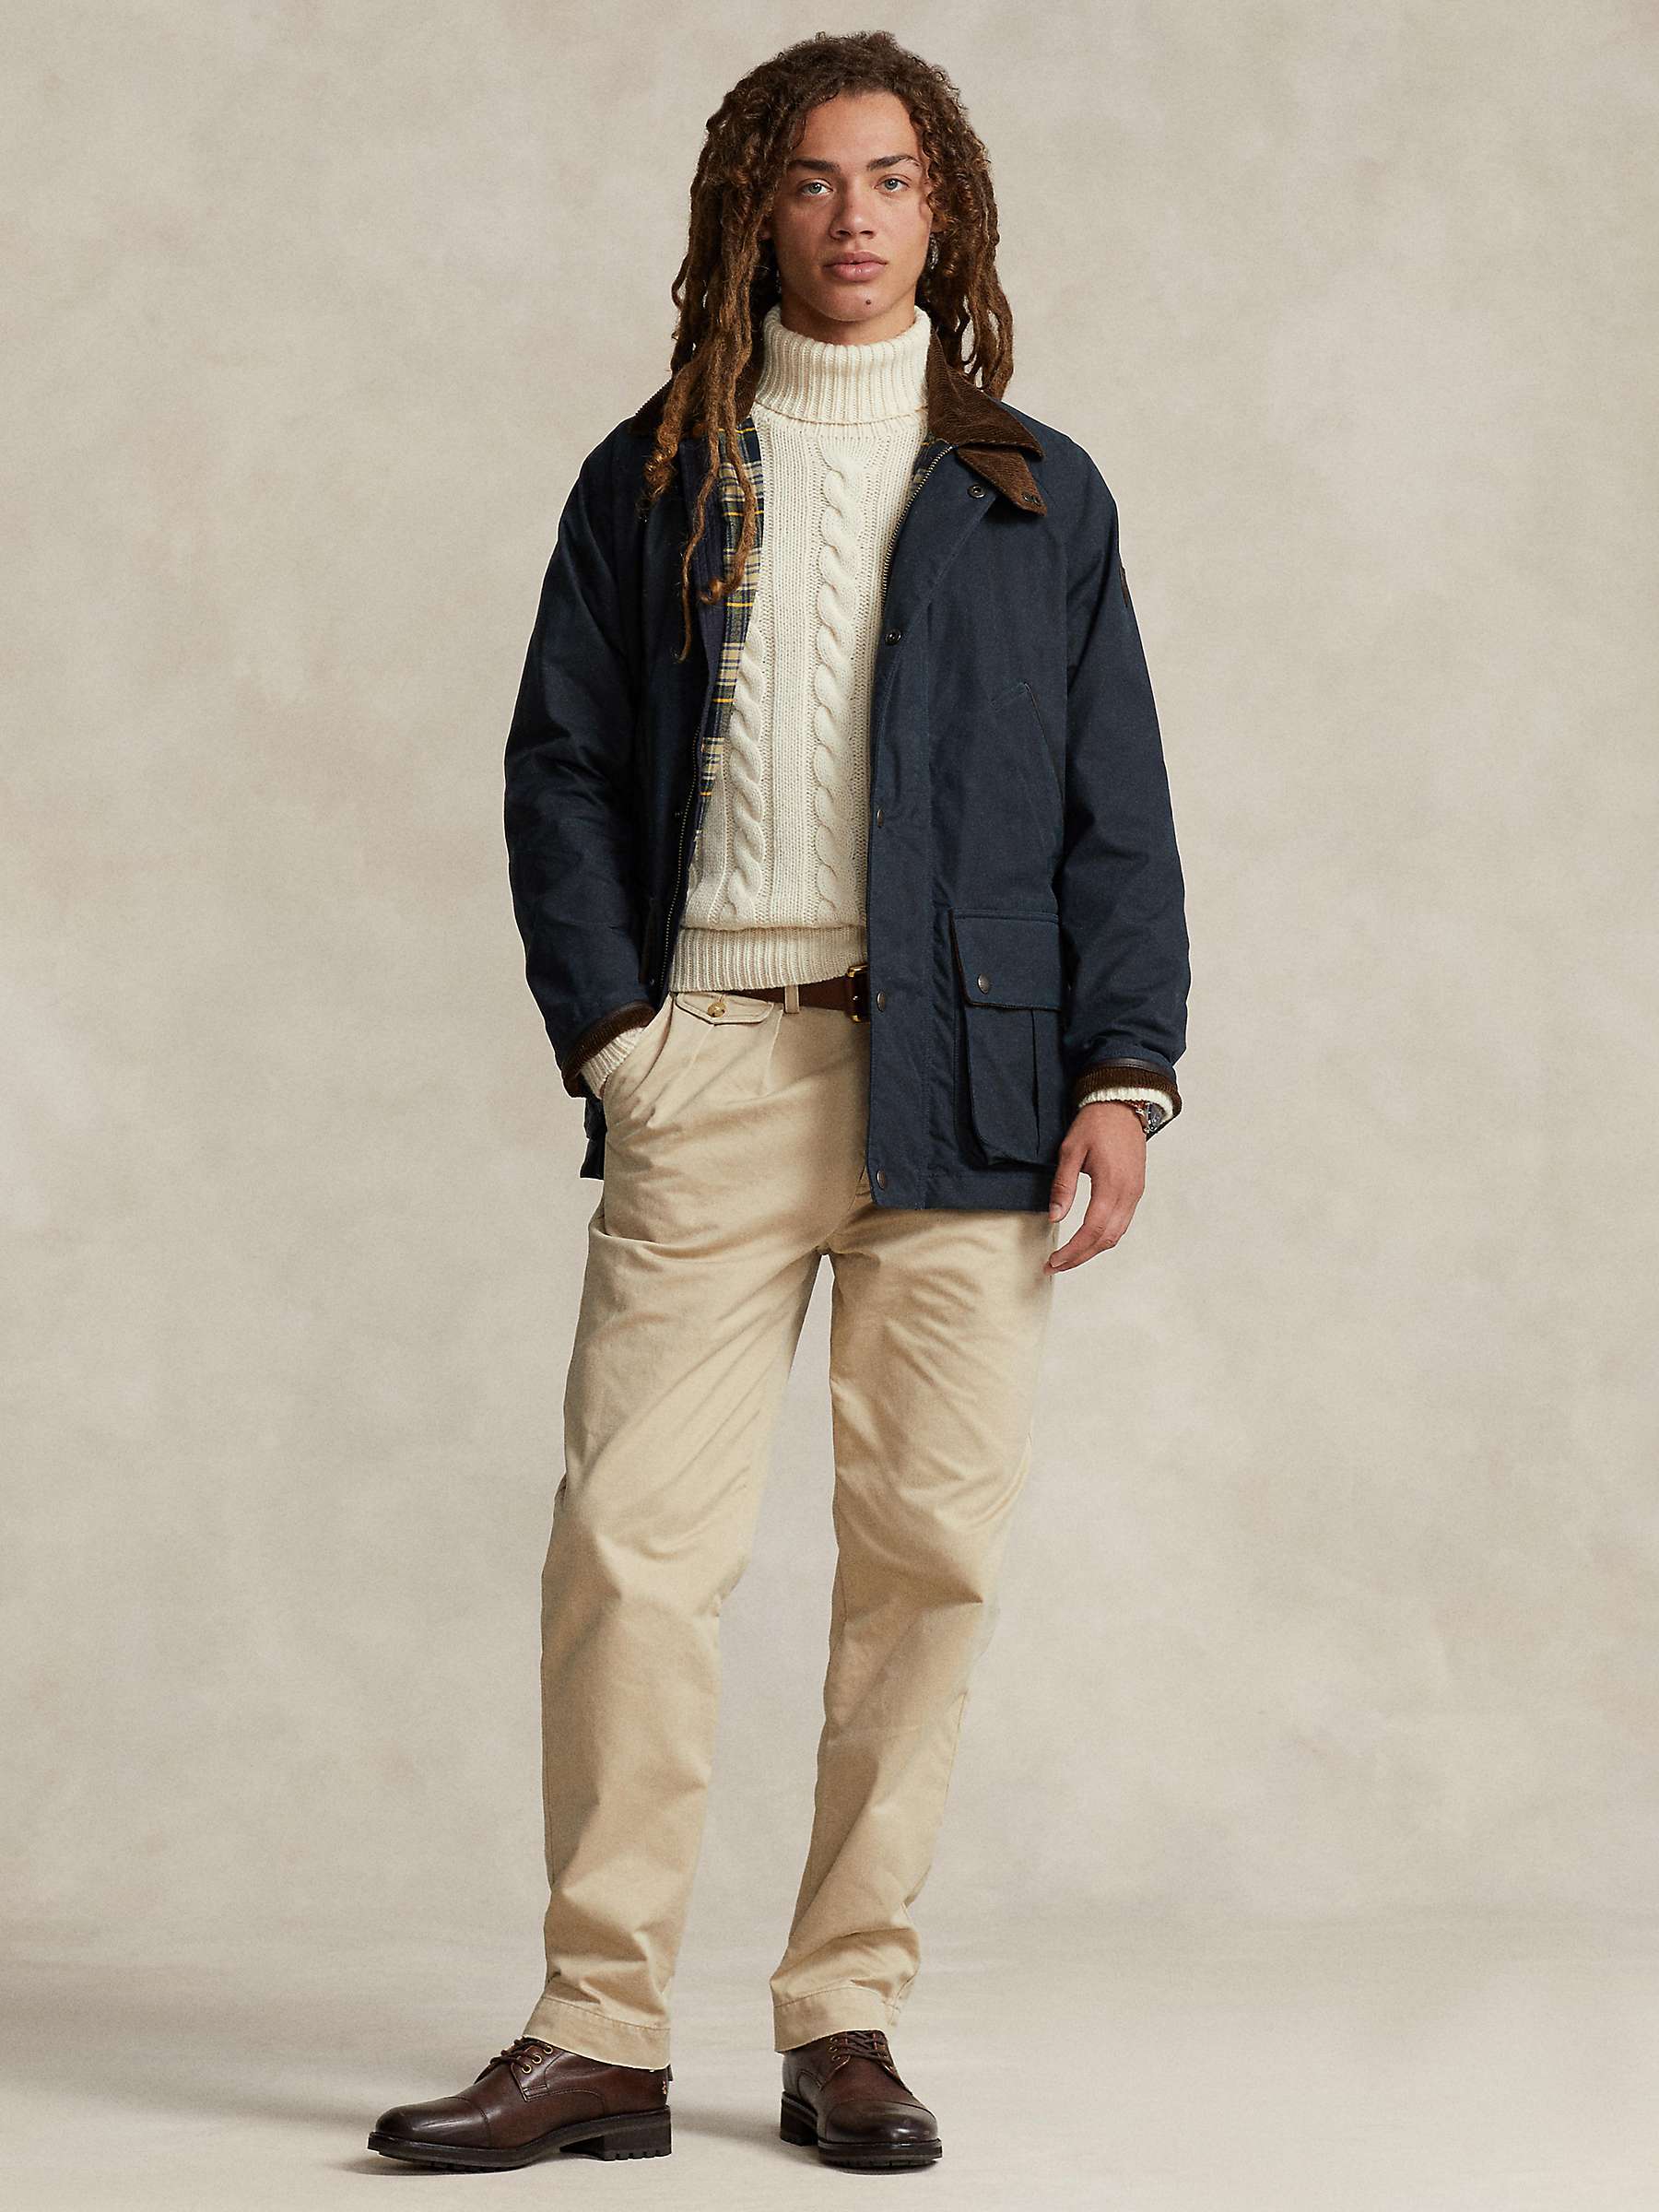 Buy Polo Ralph Lauren Waxed Field Jacket, Collection Navy Online at johnlewis.com